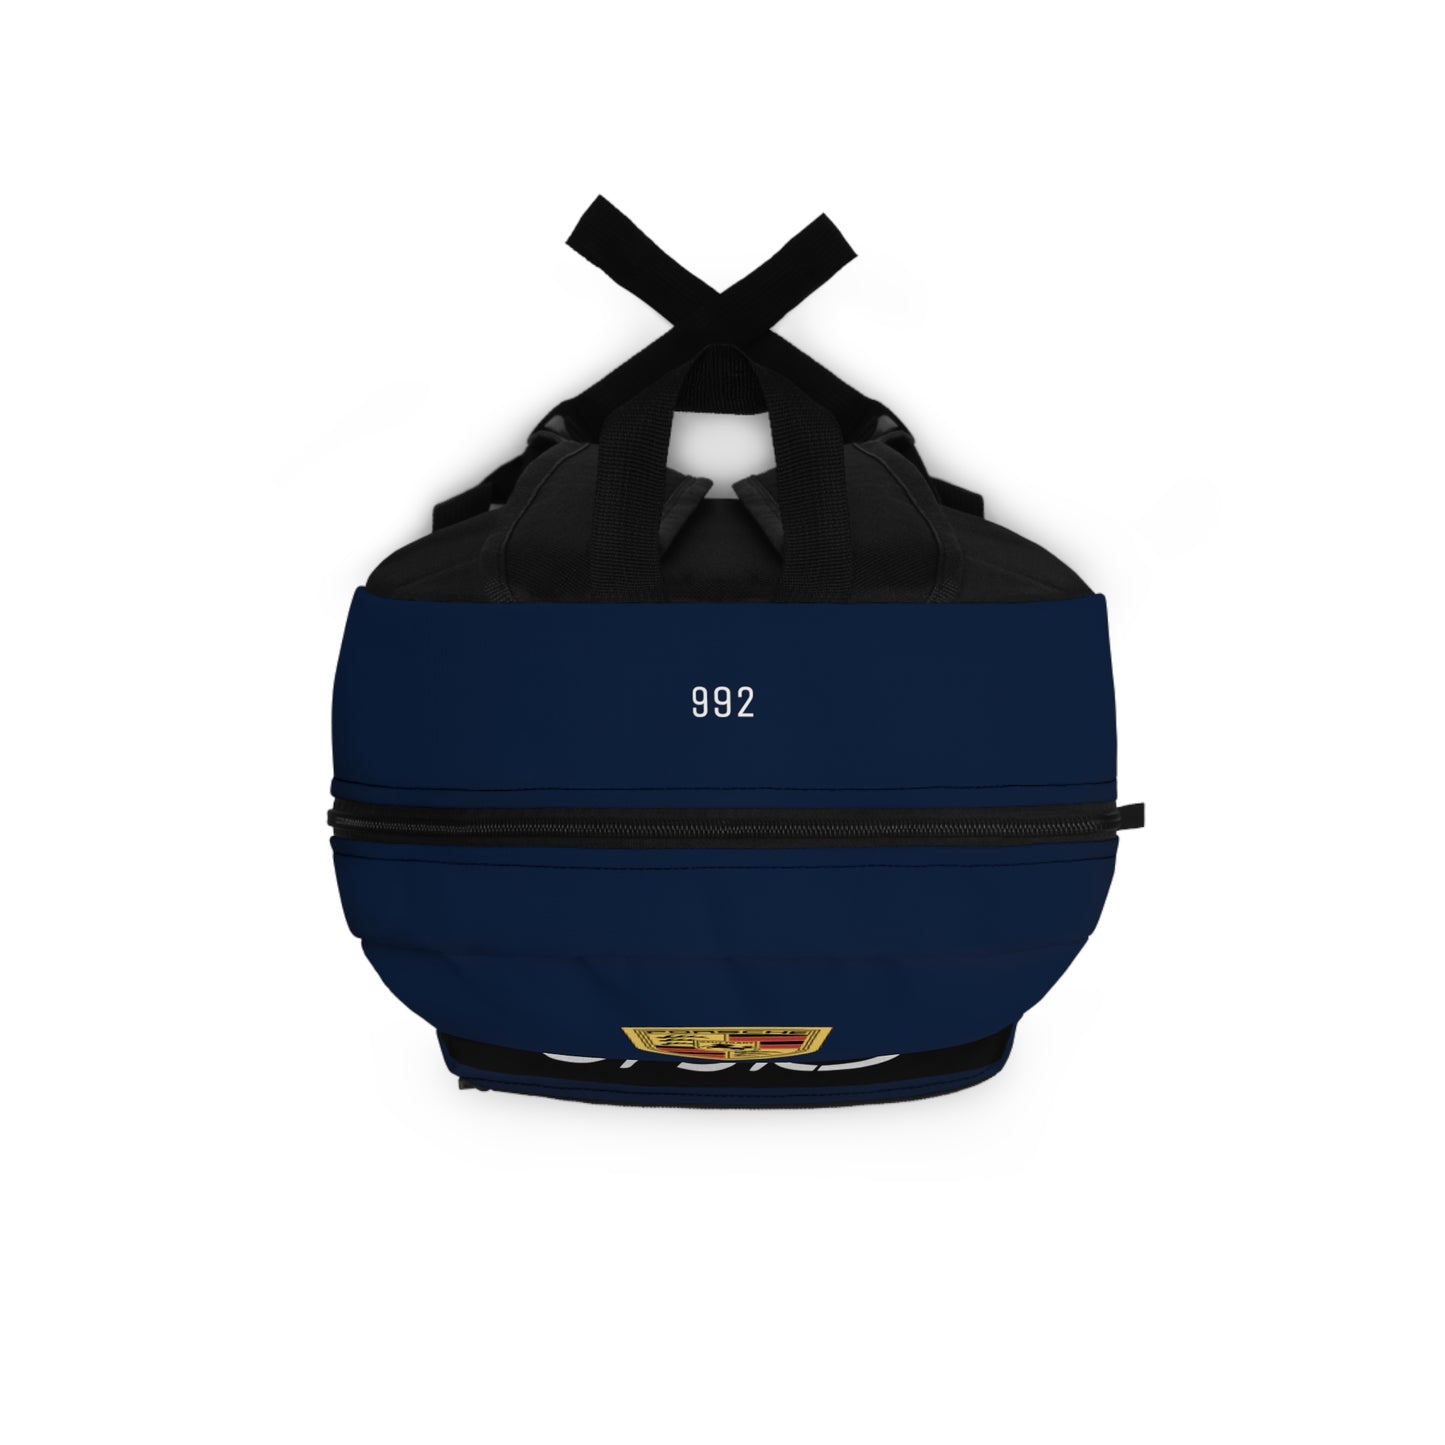 Gentian Blue GT3 RS 911 992 Backpack - Limited Edition - 1 Produced